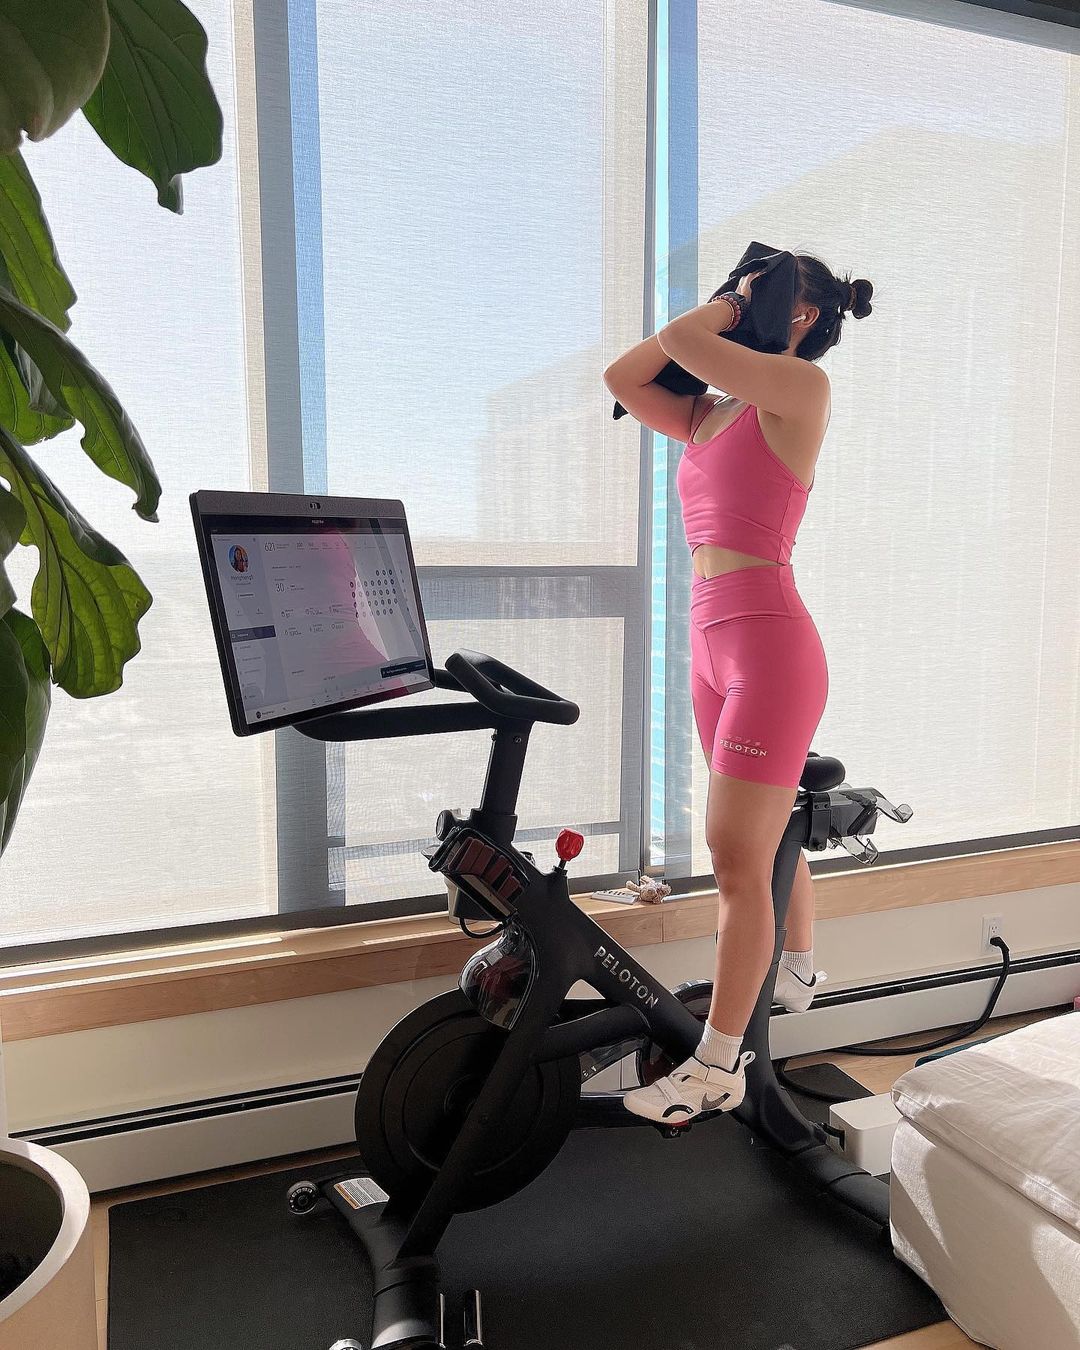 exercise-induced rhabdo from spin class